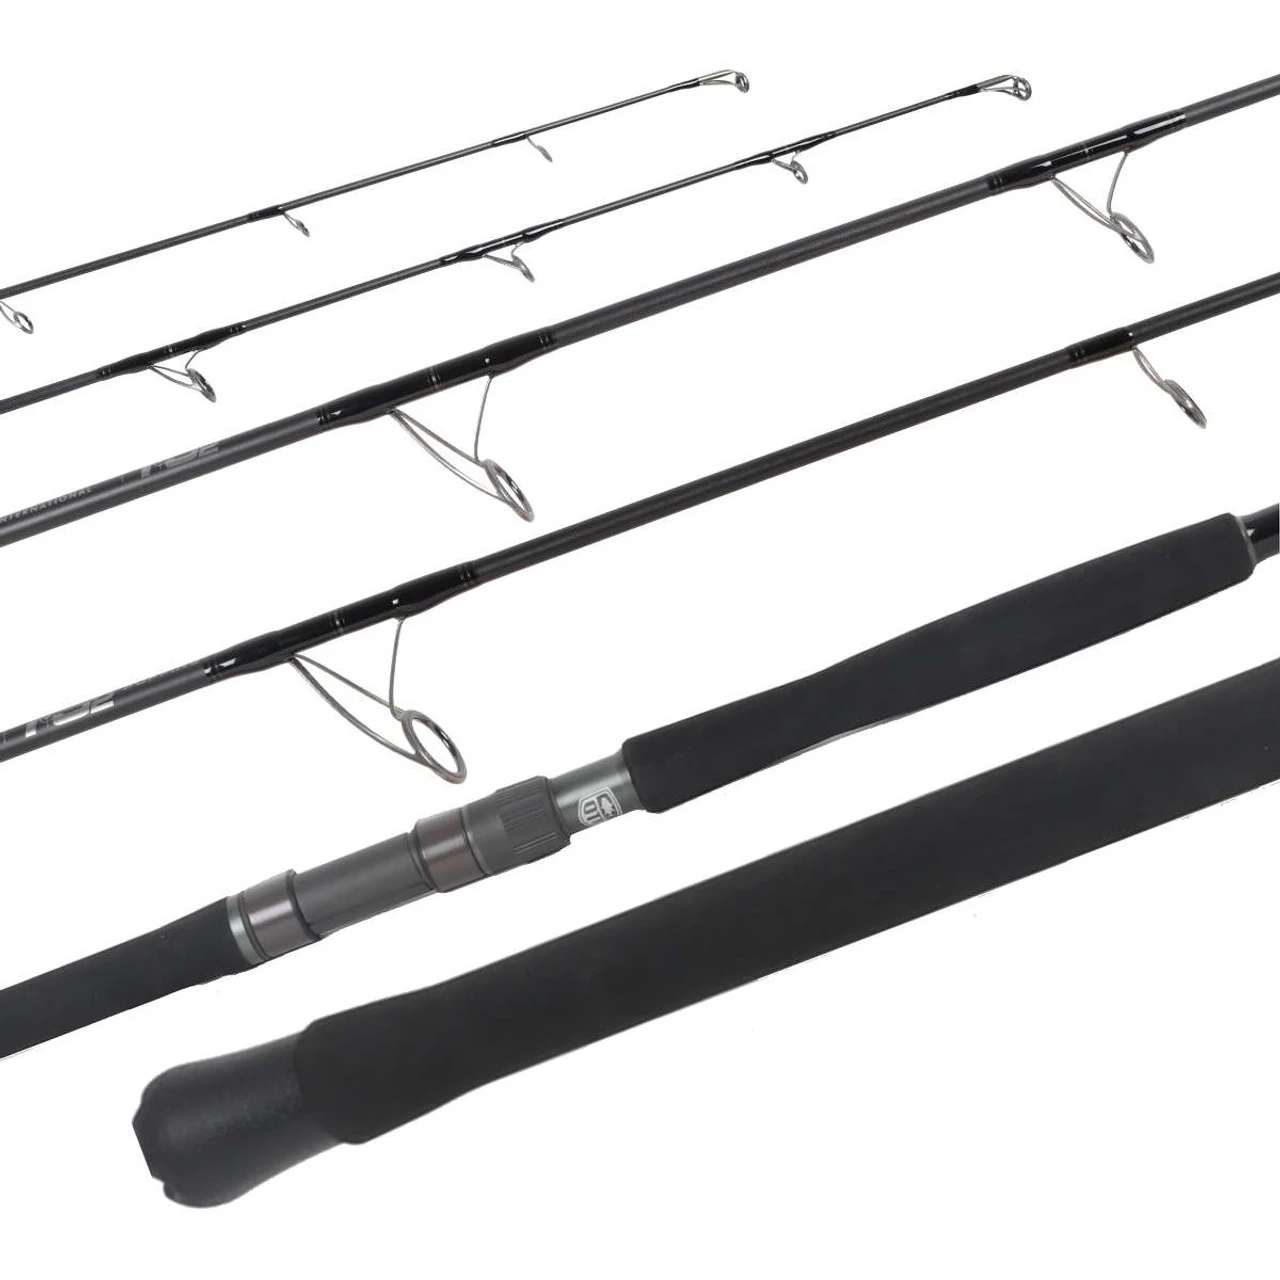 Ocean Tackle International TS2 Popping Rods - TackleDirect